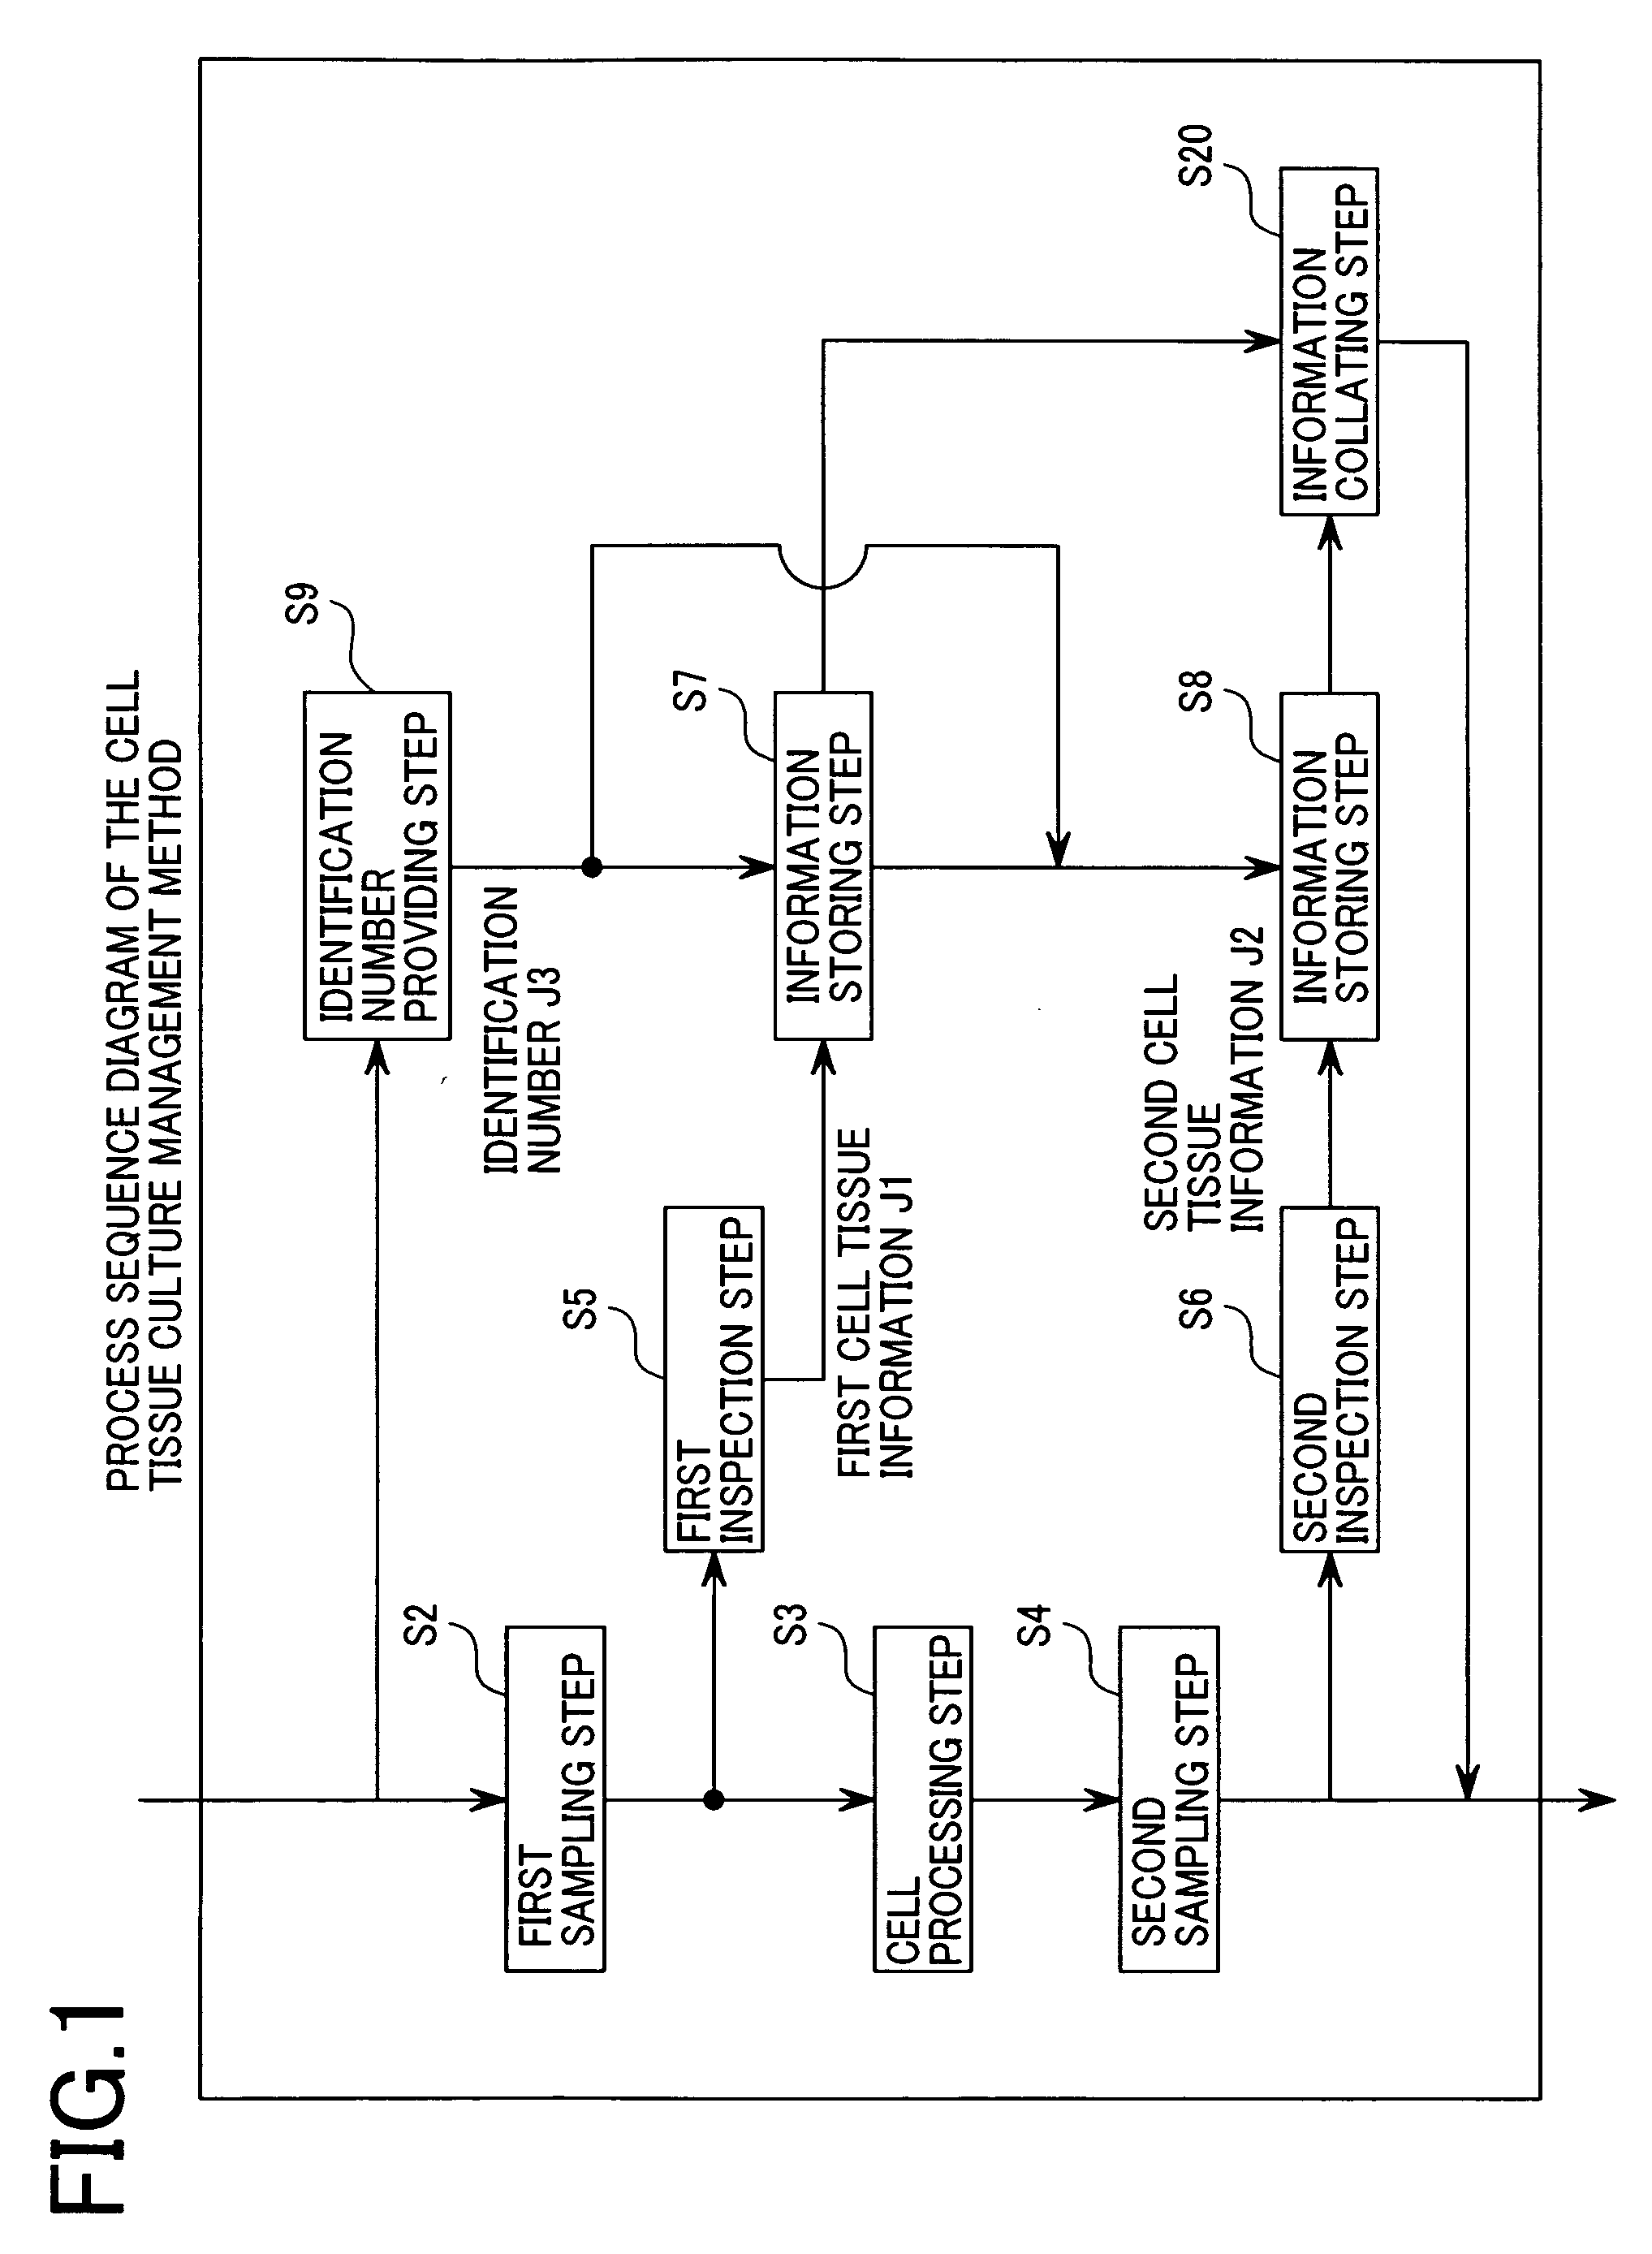 Cell tissue culture management method and system